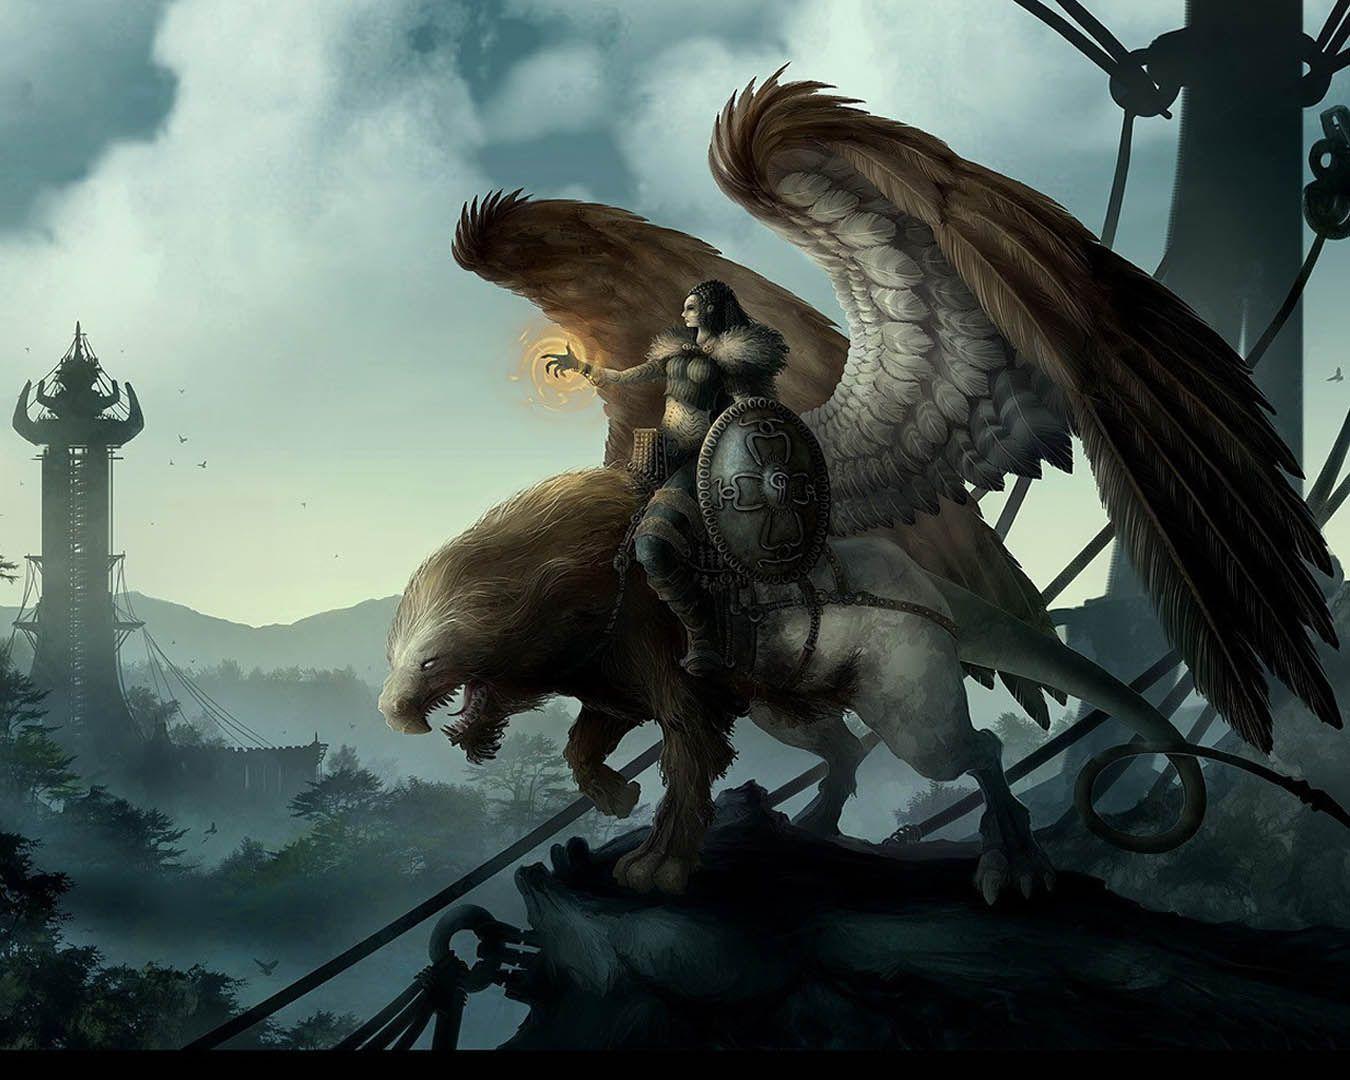 Warrior Mounted On Griffin monsters wallpaper image. Art